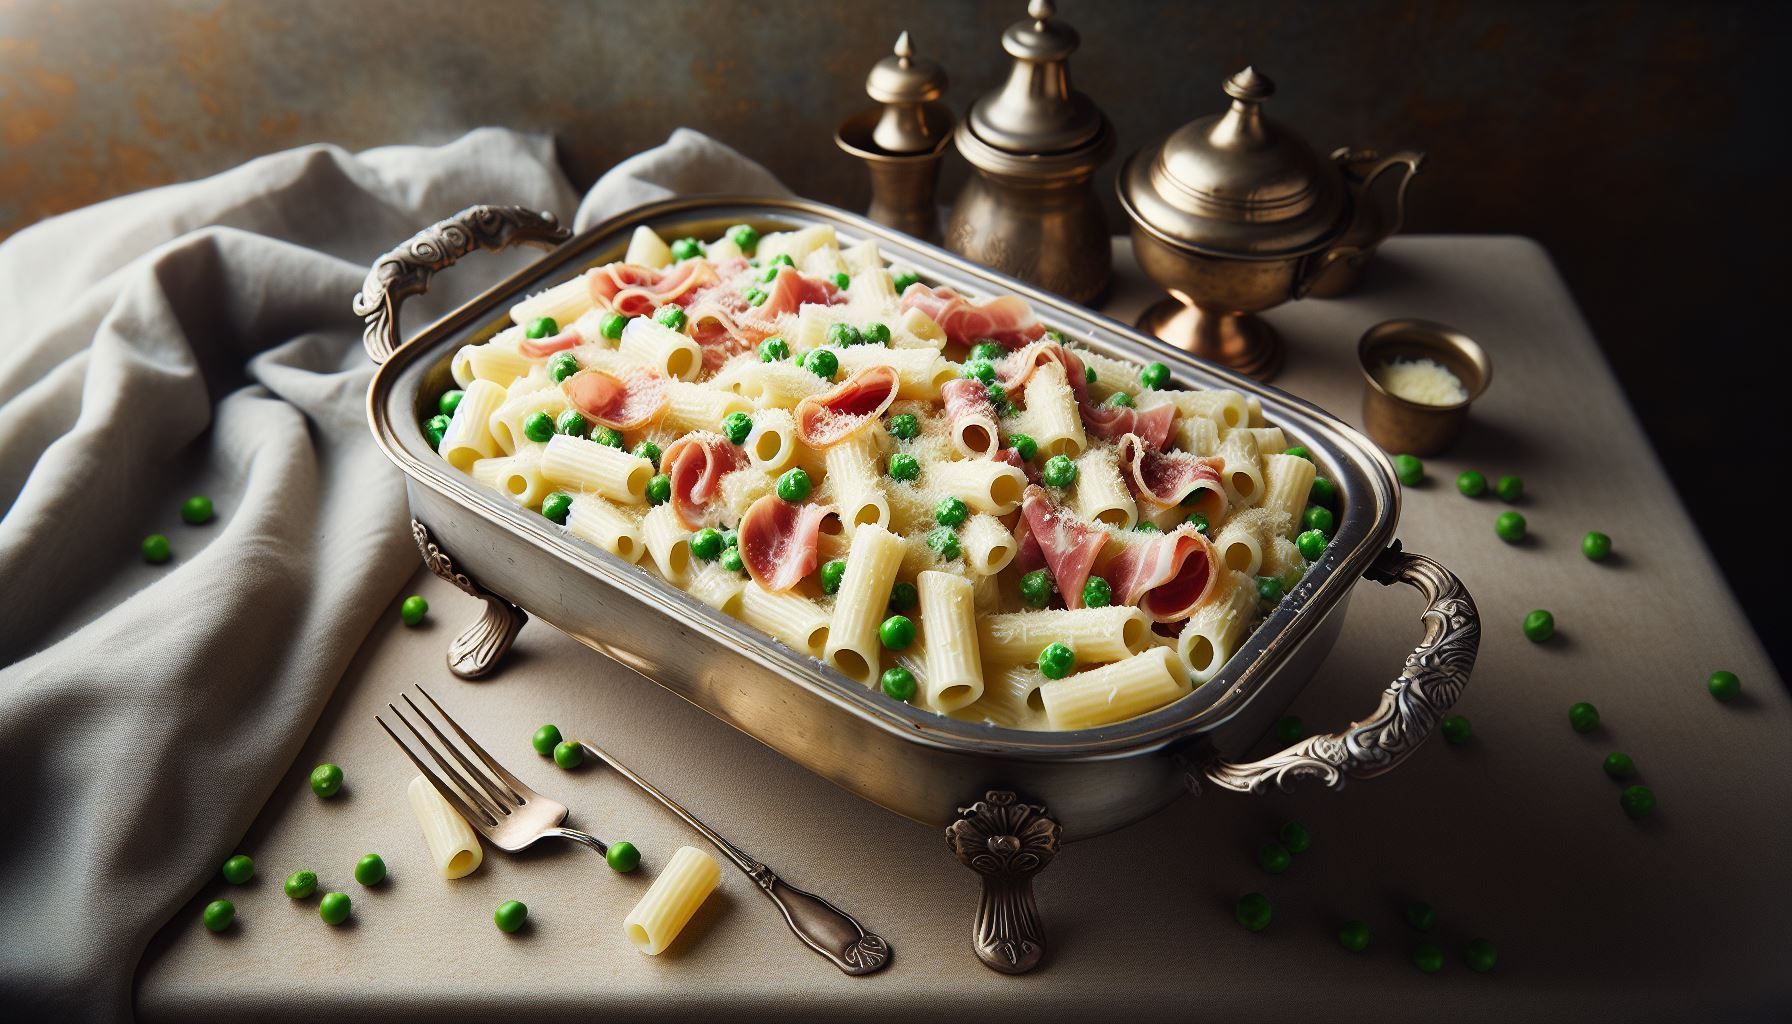 A casserole dish filled with pasta and peas on a table.